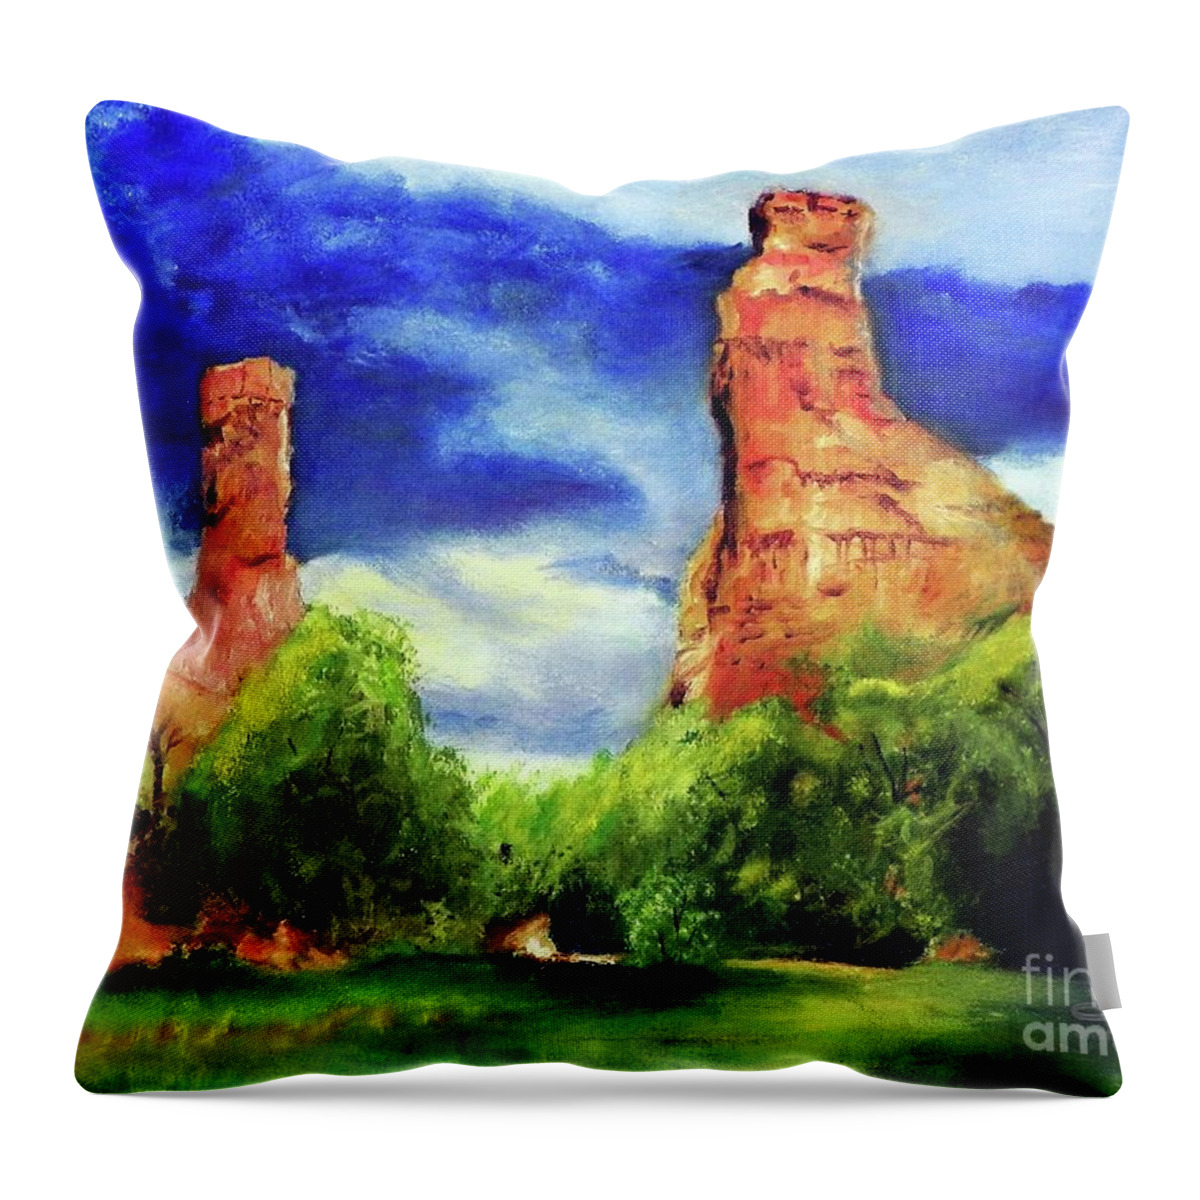 Strawberry Pinnacles Throw Pillow featuring the painting Strawberry Pinnacles by Sherril Porter